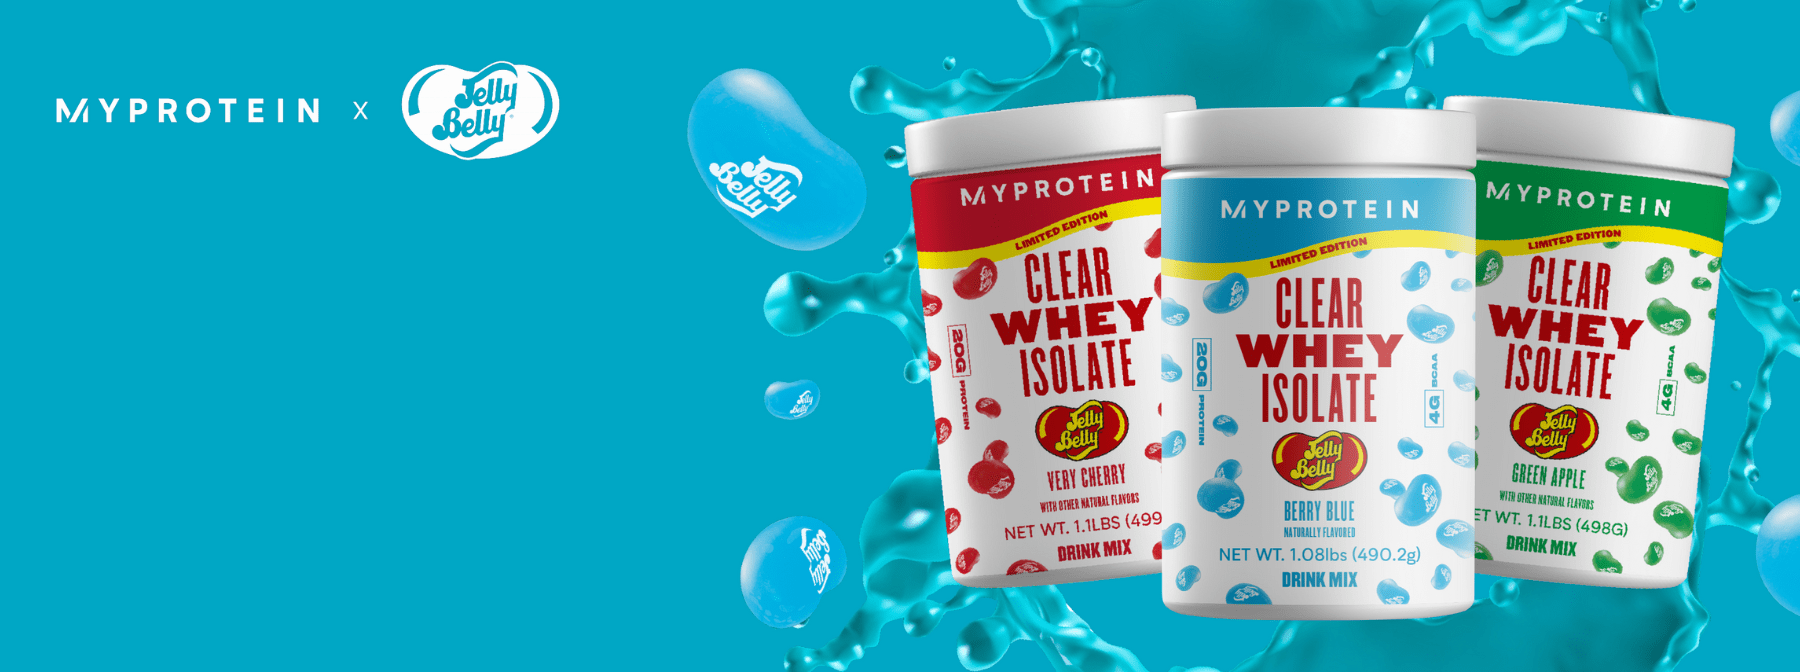 New Jelly Belly Clear Whey Isolate Flavors—Coming in July